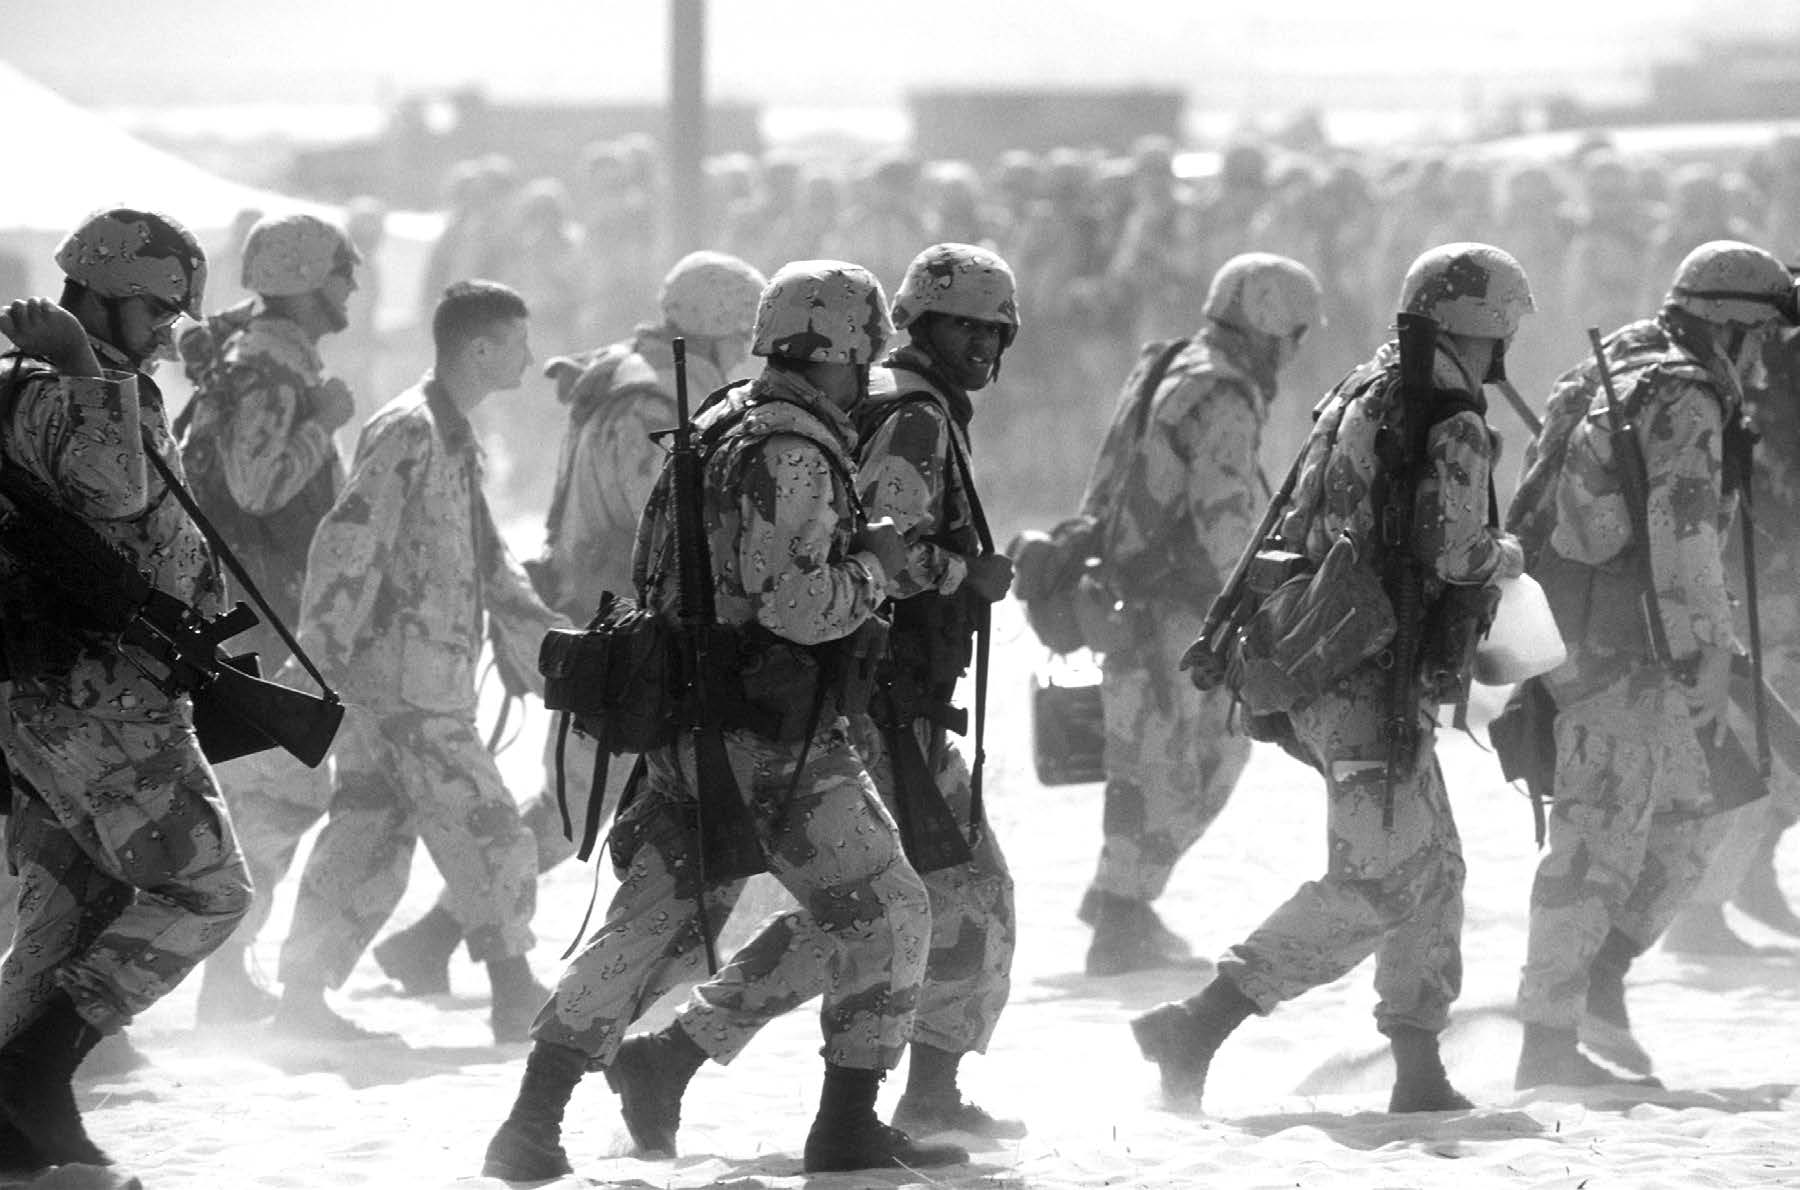 Newly arrived Marines move through an airfield encampment during Operation Desert Shield. Courtesy of DoD.